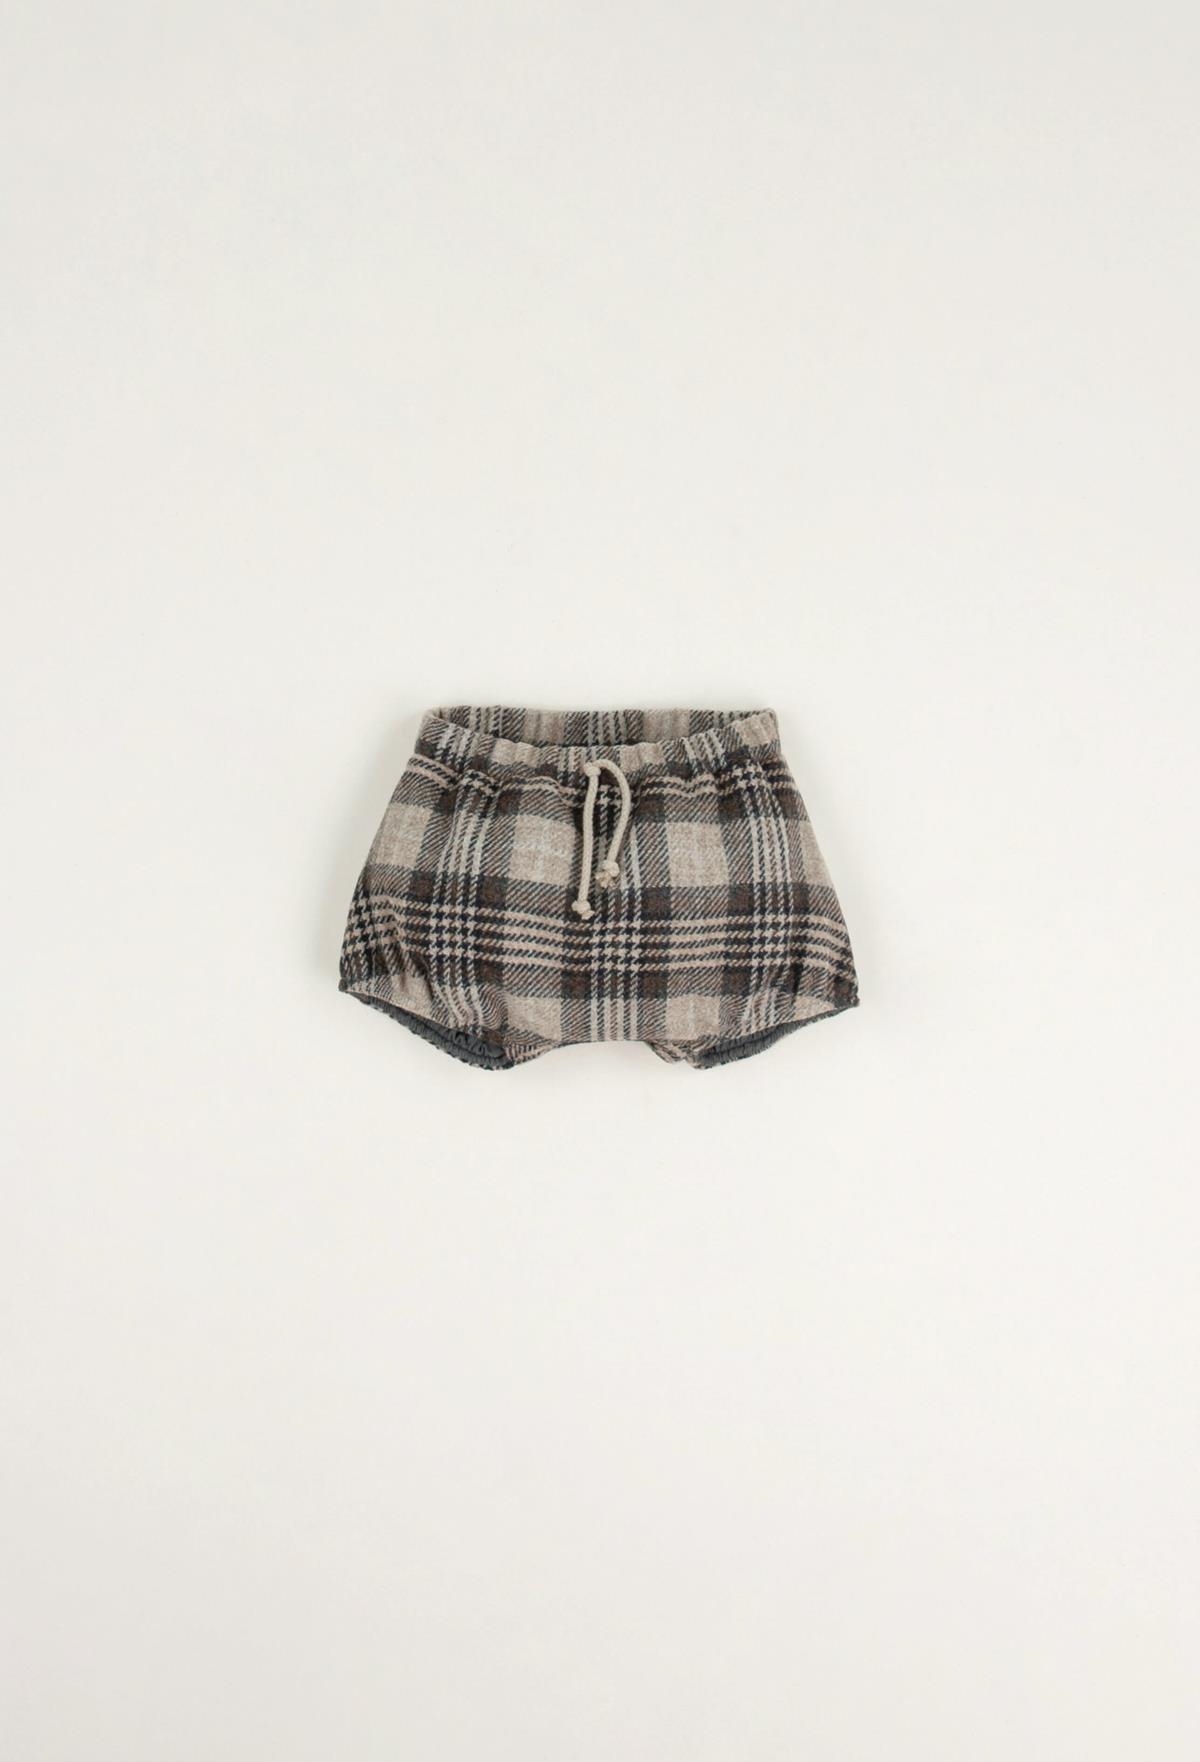 Mod.8.4 Brown plaid culotte with side seams | AW22.23 Mod.8.4 Brown plaid culotte with side seams